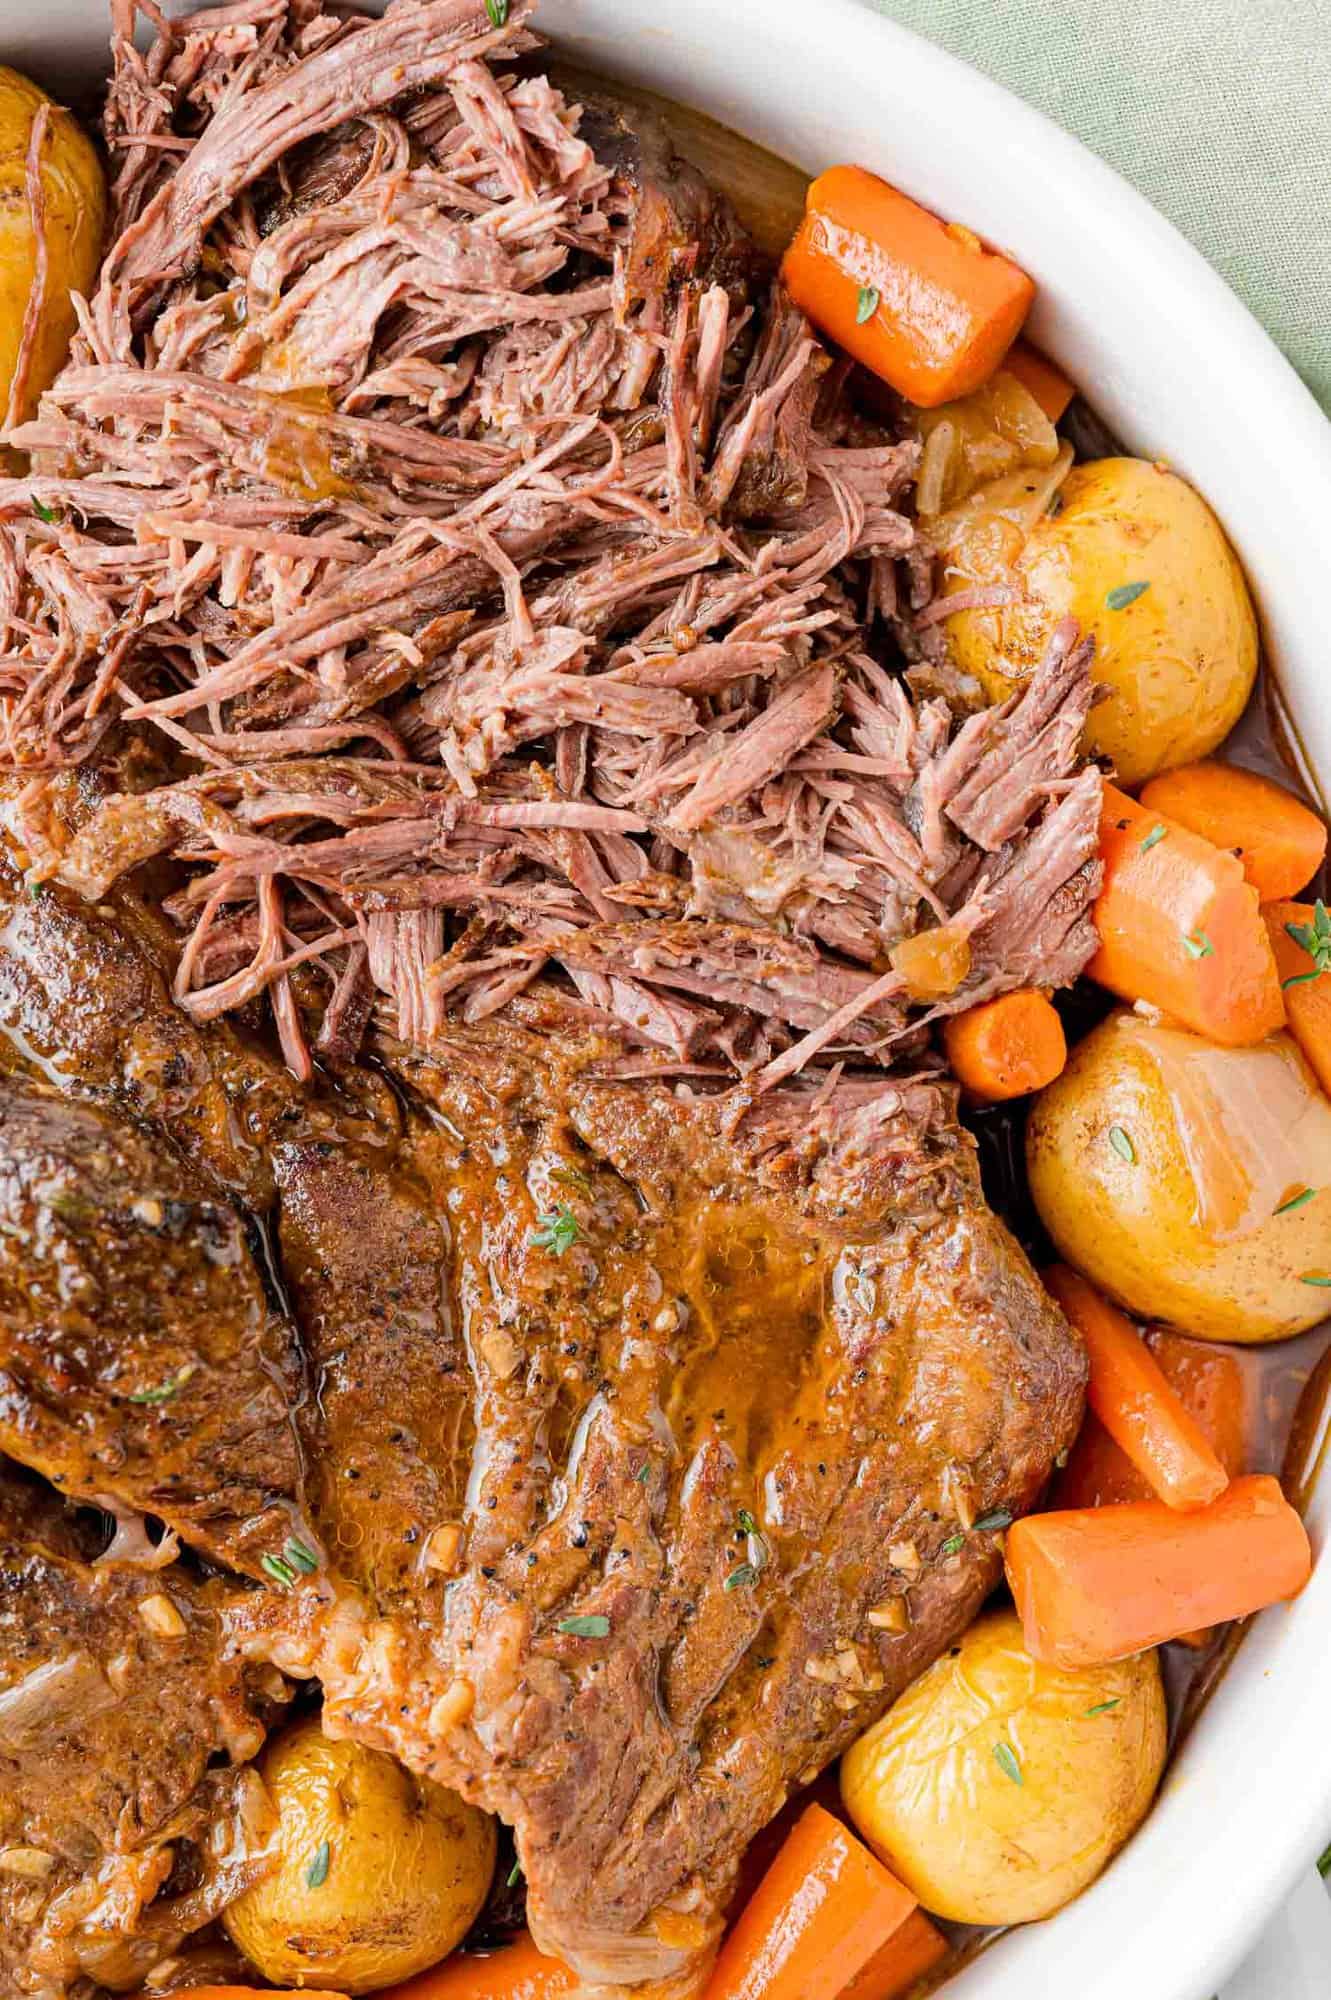 Pot roast, partially shredded, with potatoes and carrots.